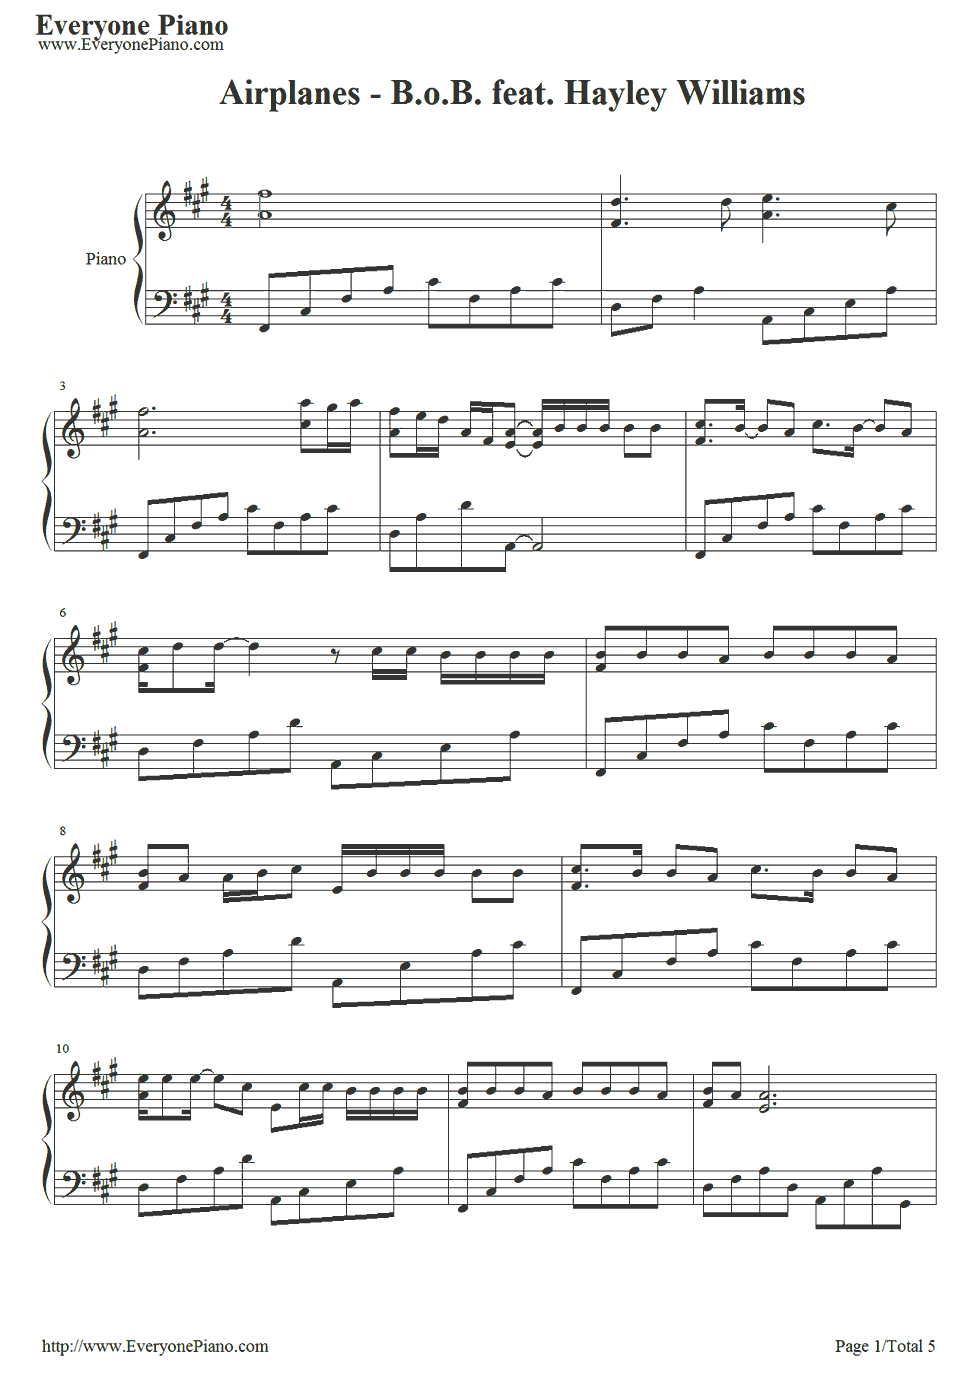 Airplanes-B.o.b. Feat. Hayley Williams Stave Preview 1 | Music In - Airplanes Piano Sheet Music Free Printable